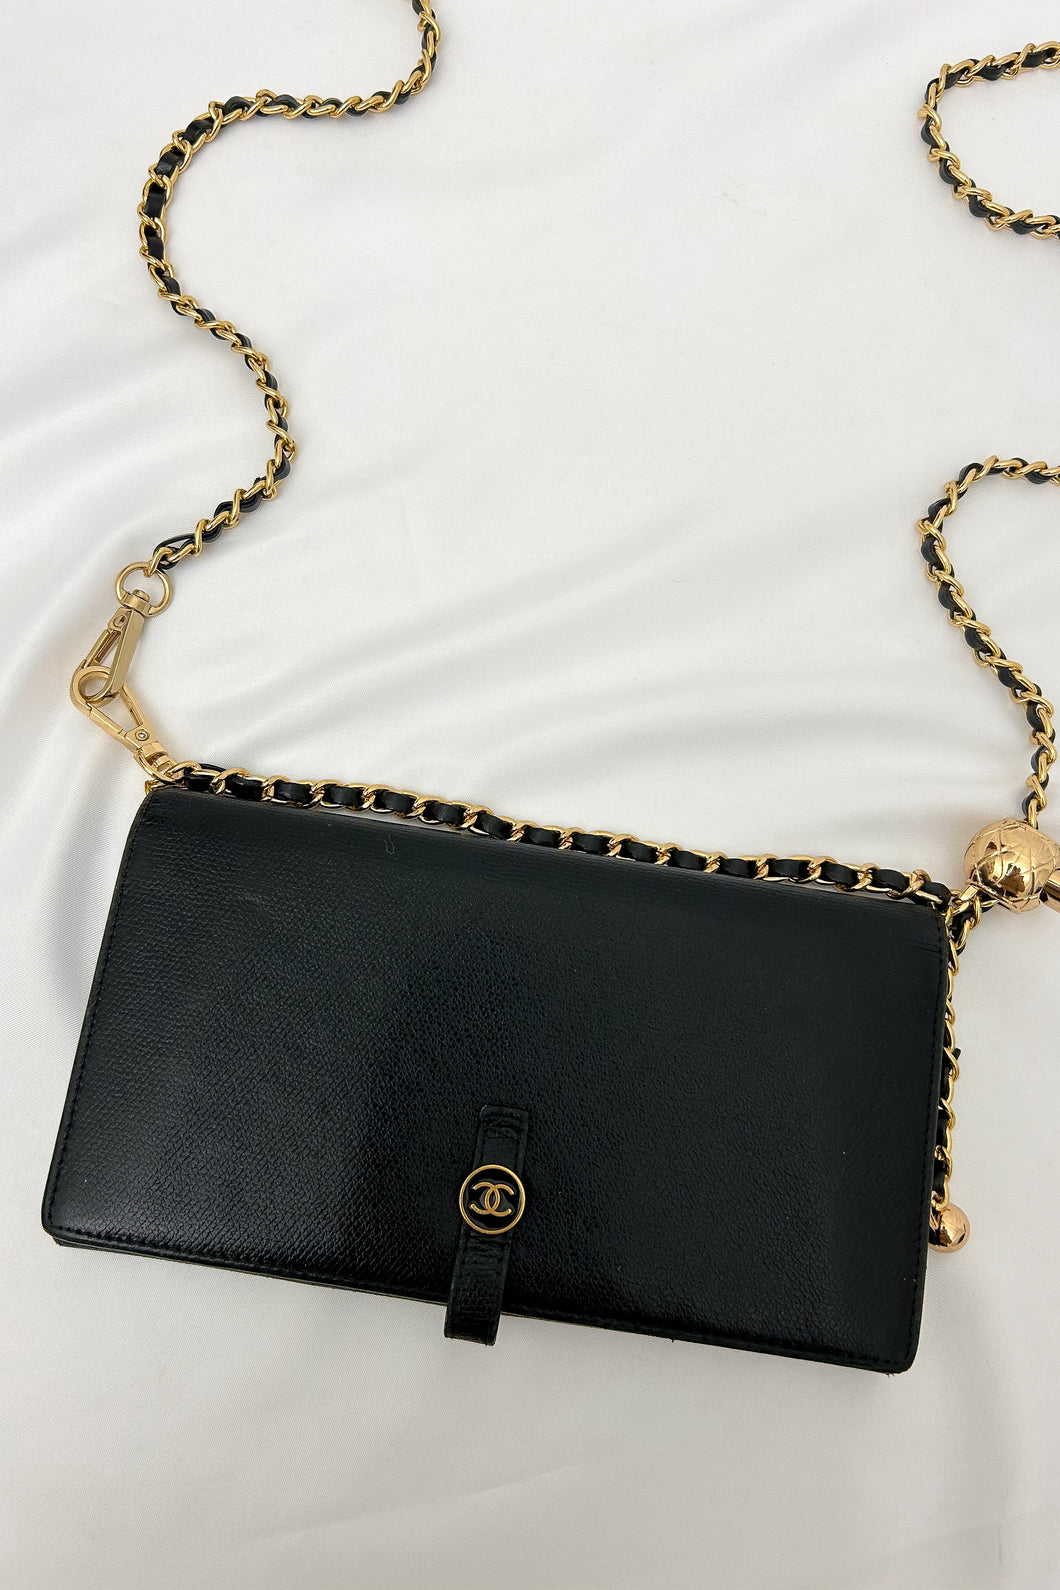 Chanel grained calfskin wallet with golden button